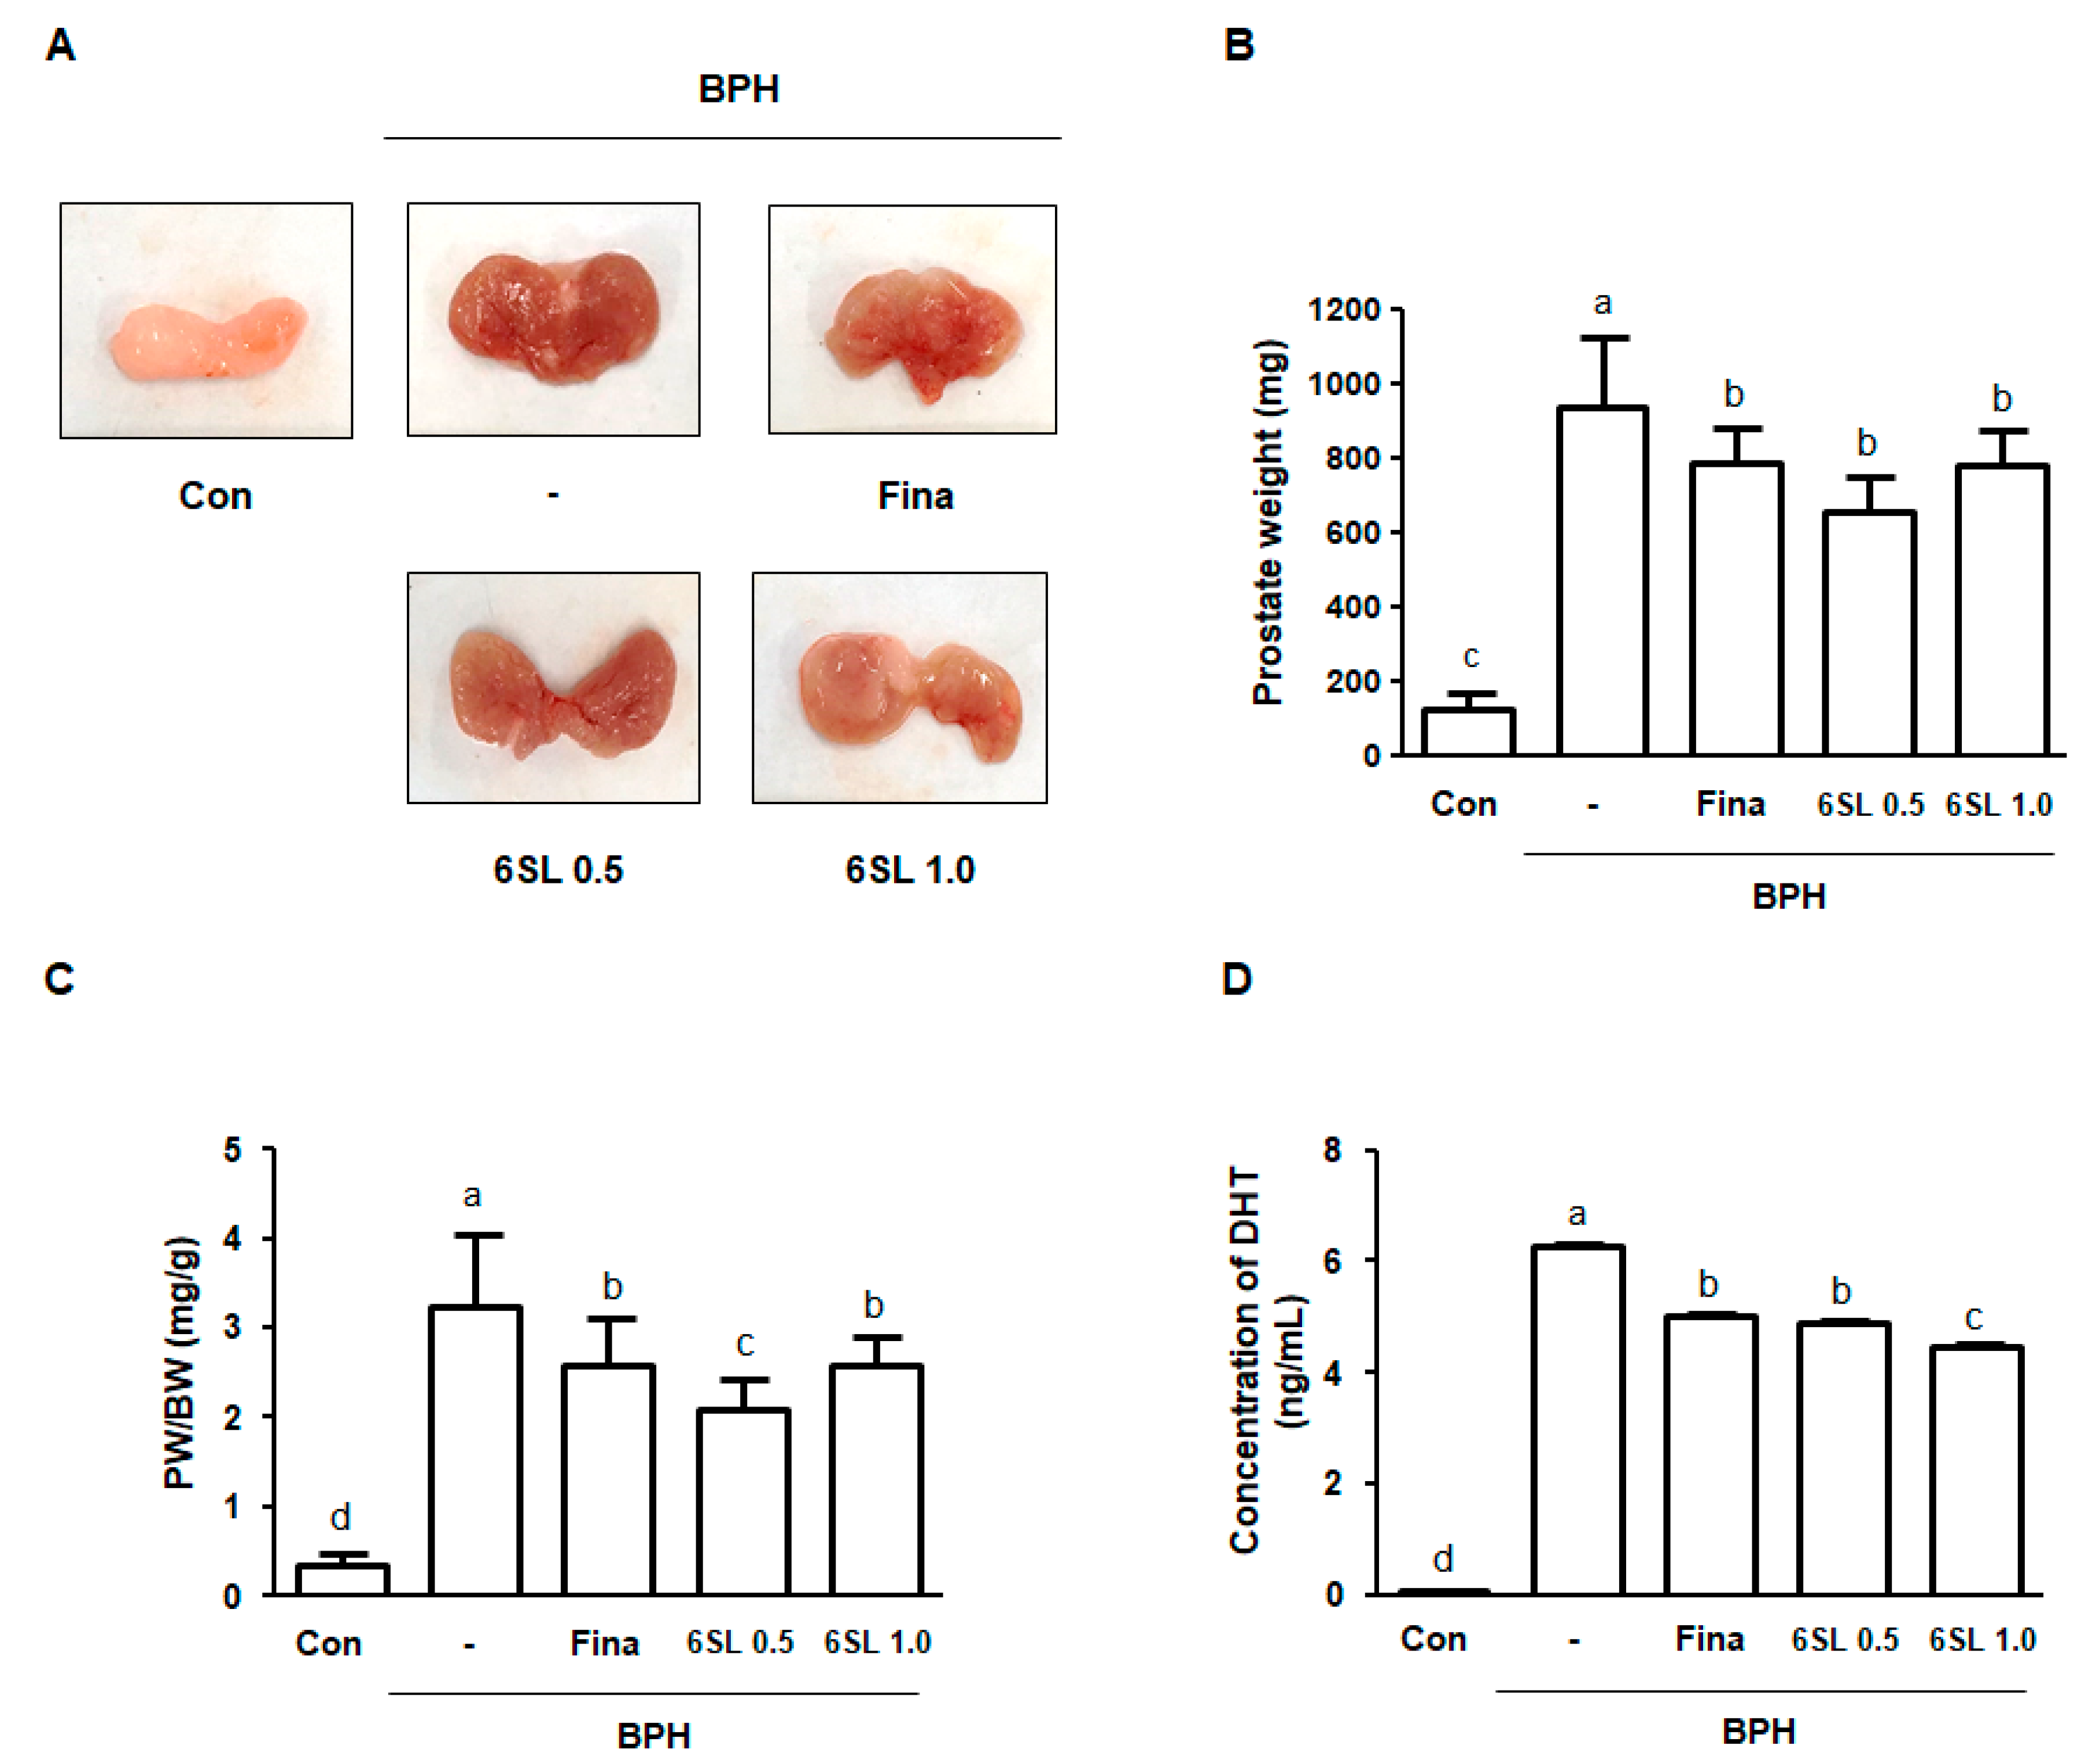 Semen impairment and occurrence of SARS-CoV-2 virus in semen after recovery from COVID-19